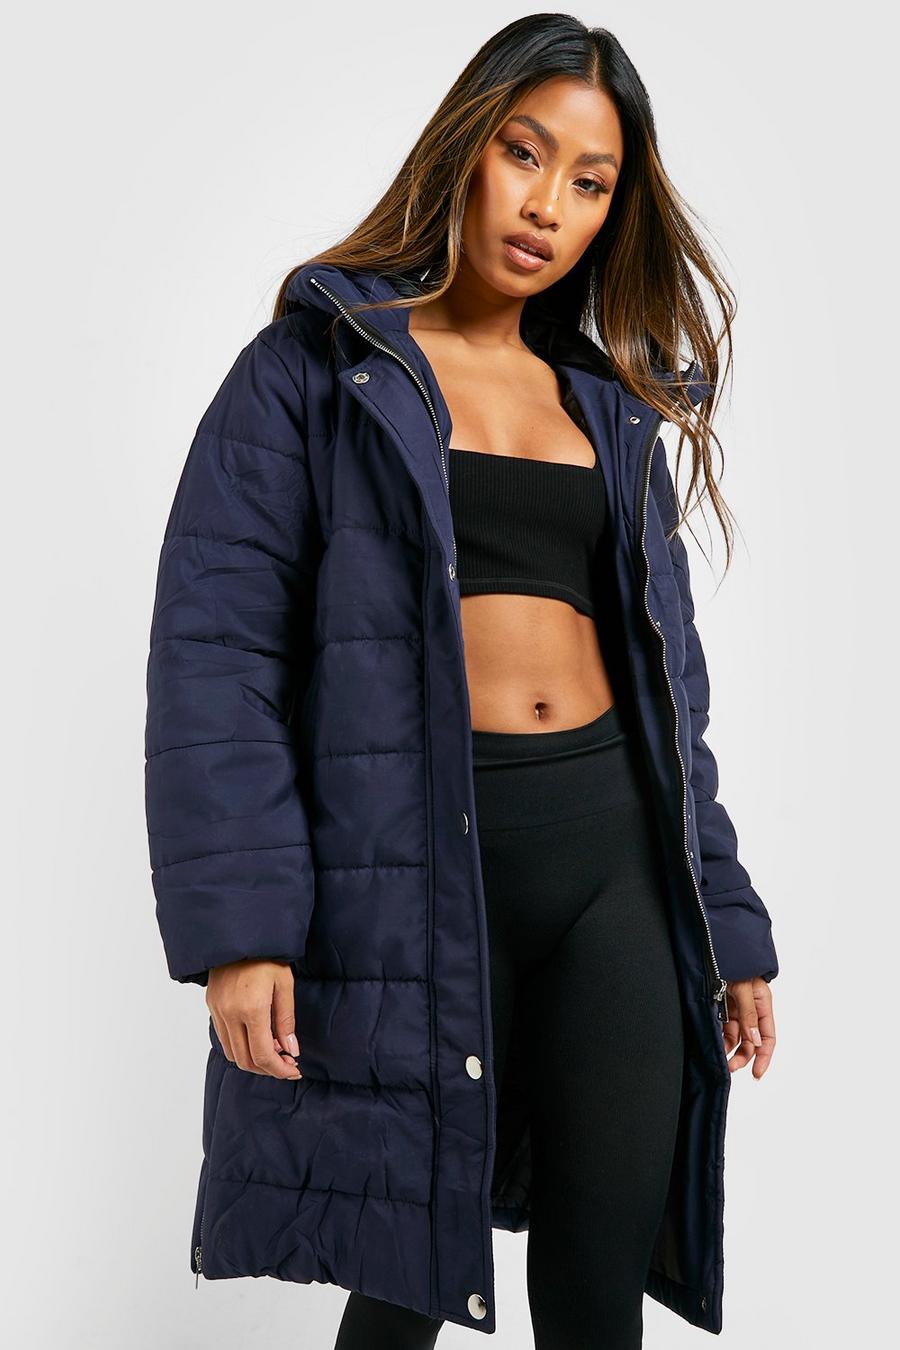 Giacca Bomber West Coast stile college, Navy